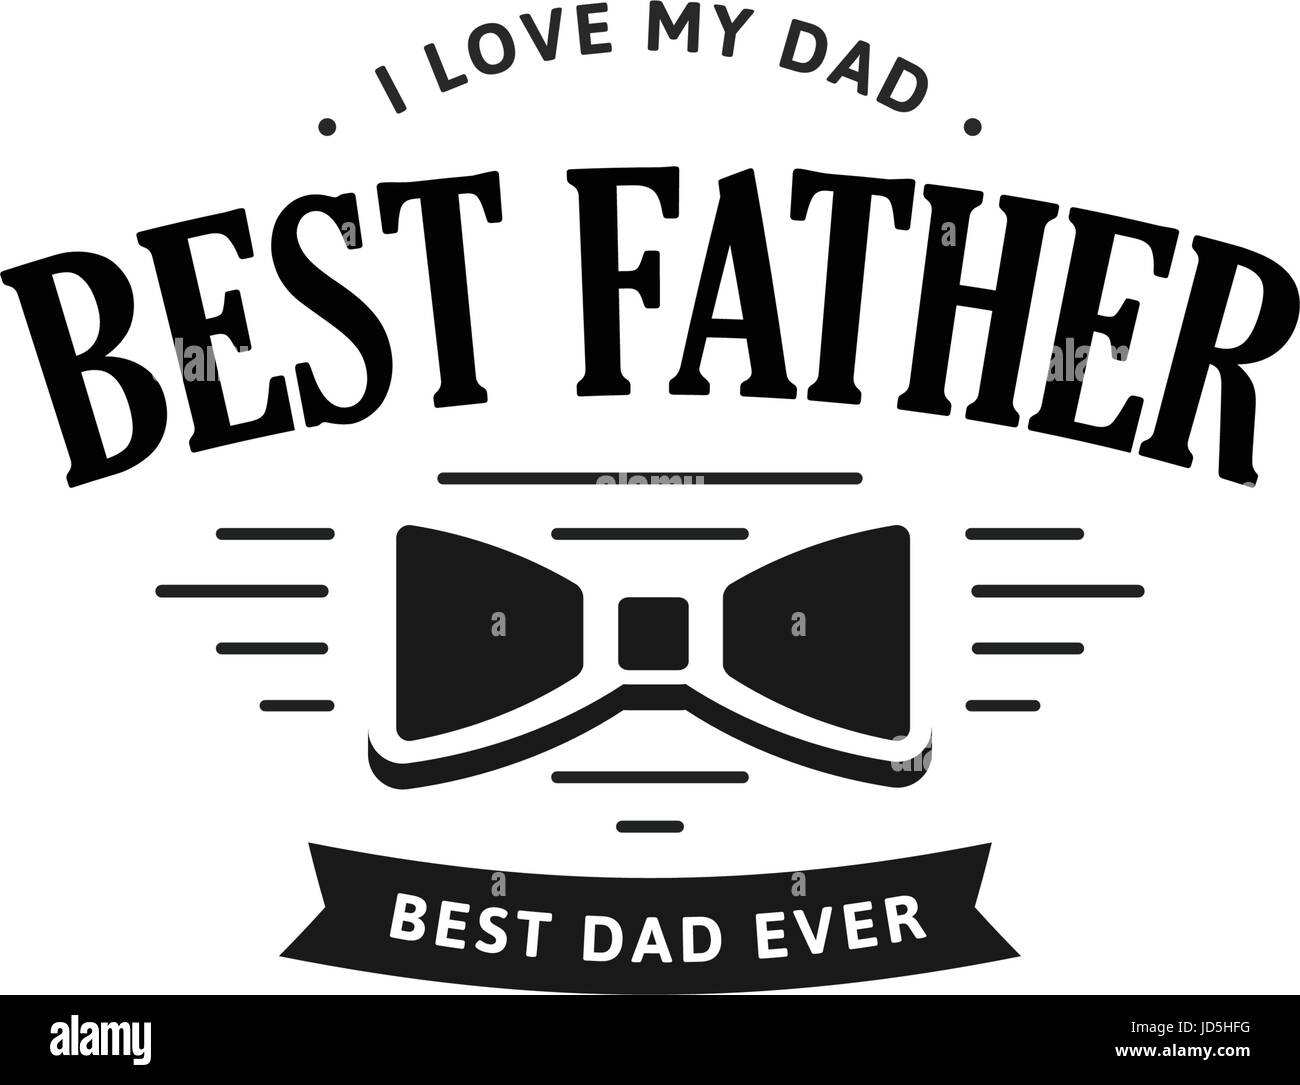 Best father. Happy Father's Day Design. Black color vintage style Father logo on light grunge background. Vector illustration. Stock Vector